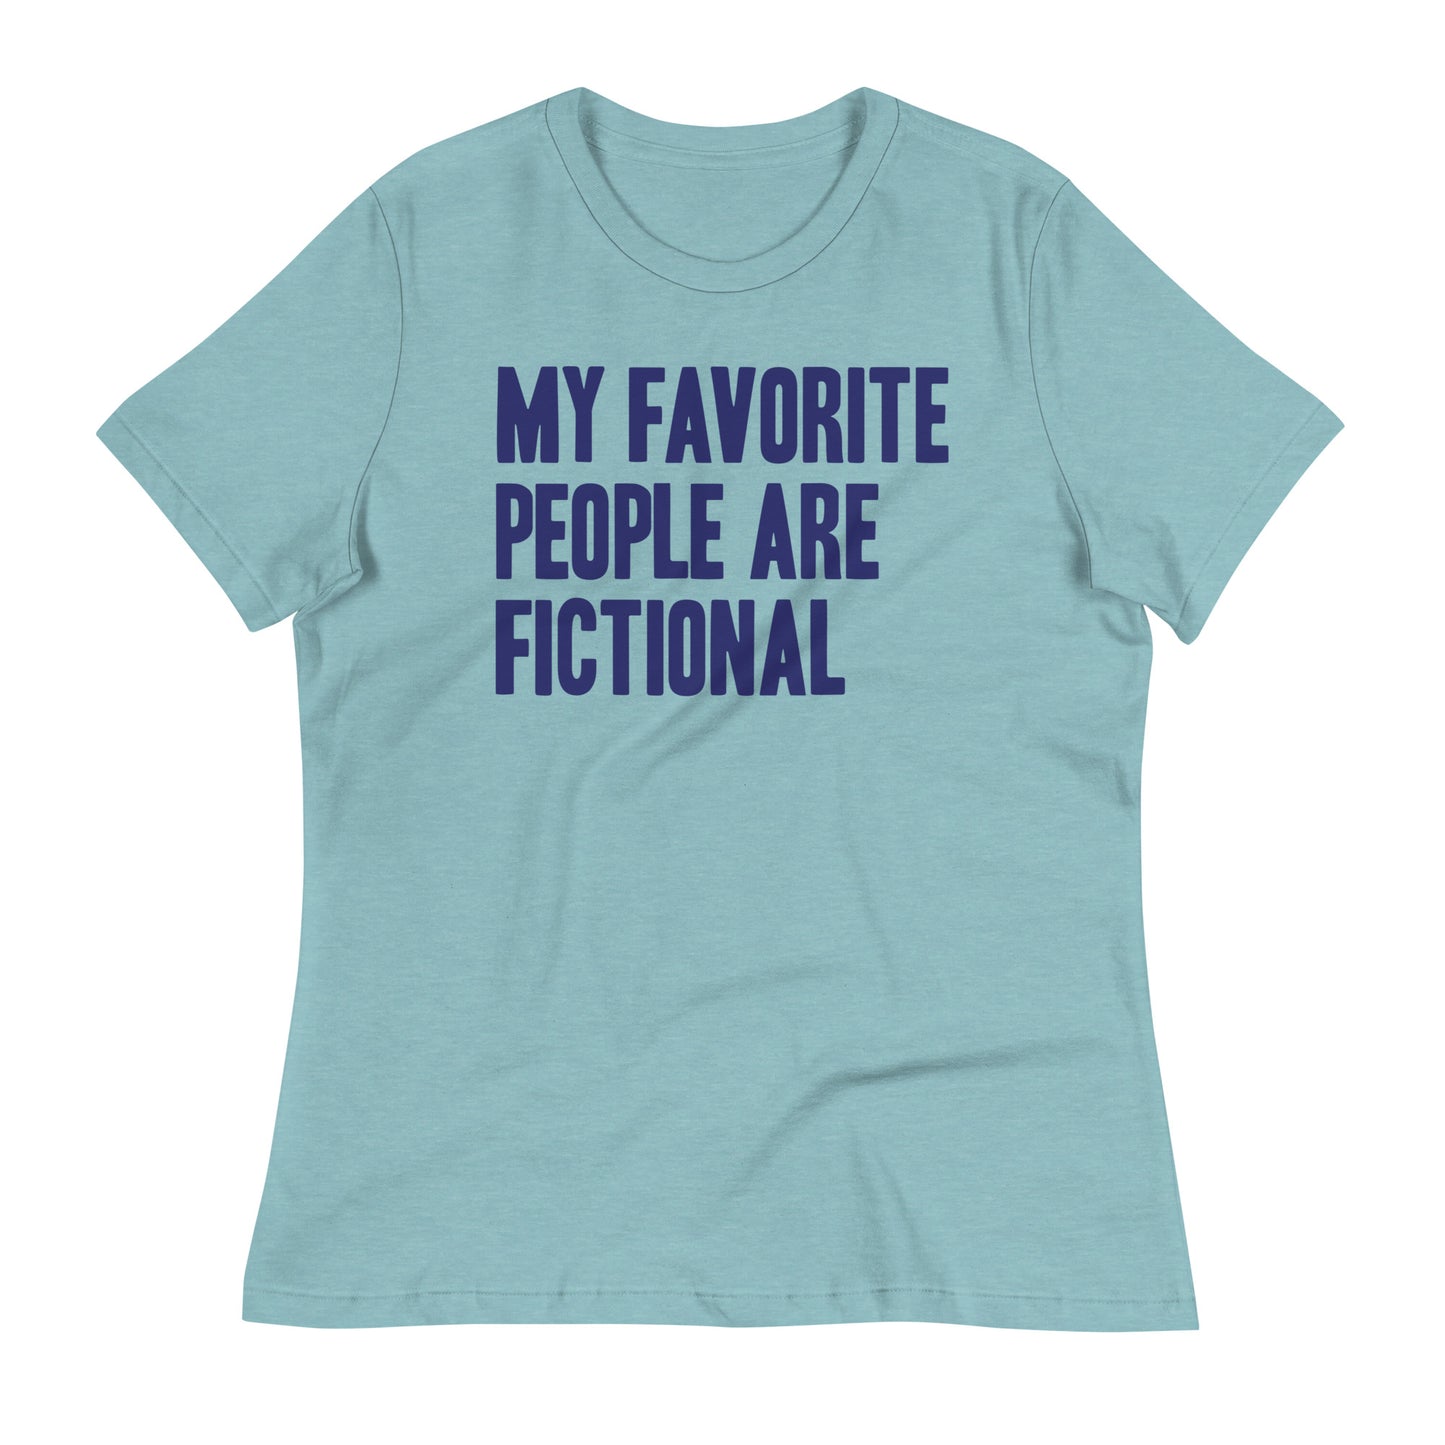 My Favorite People Are Fictional Women's Signature Tee